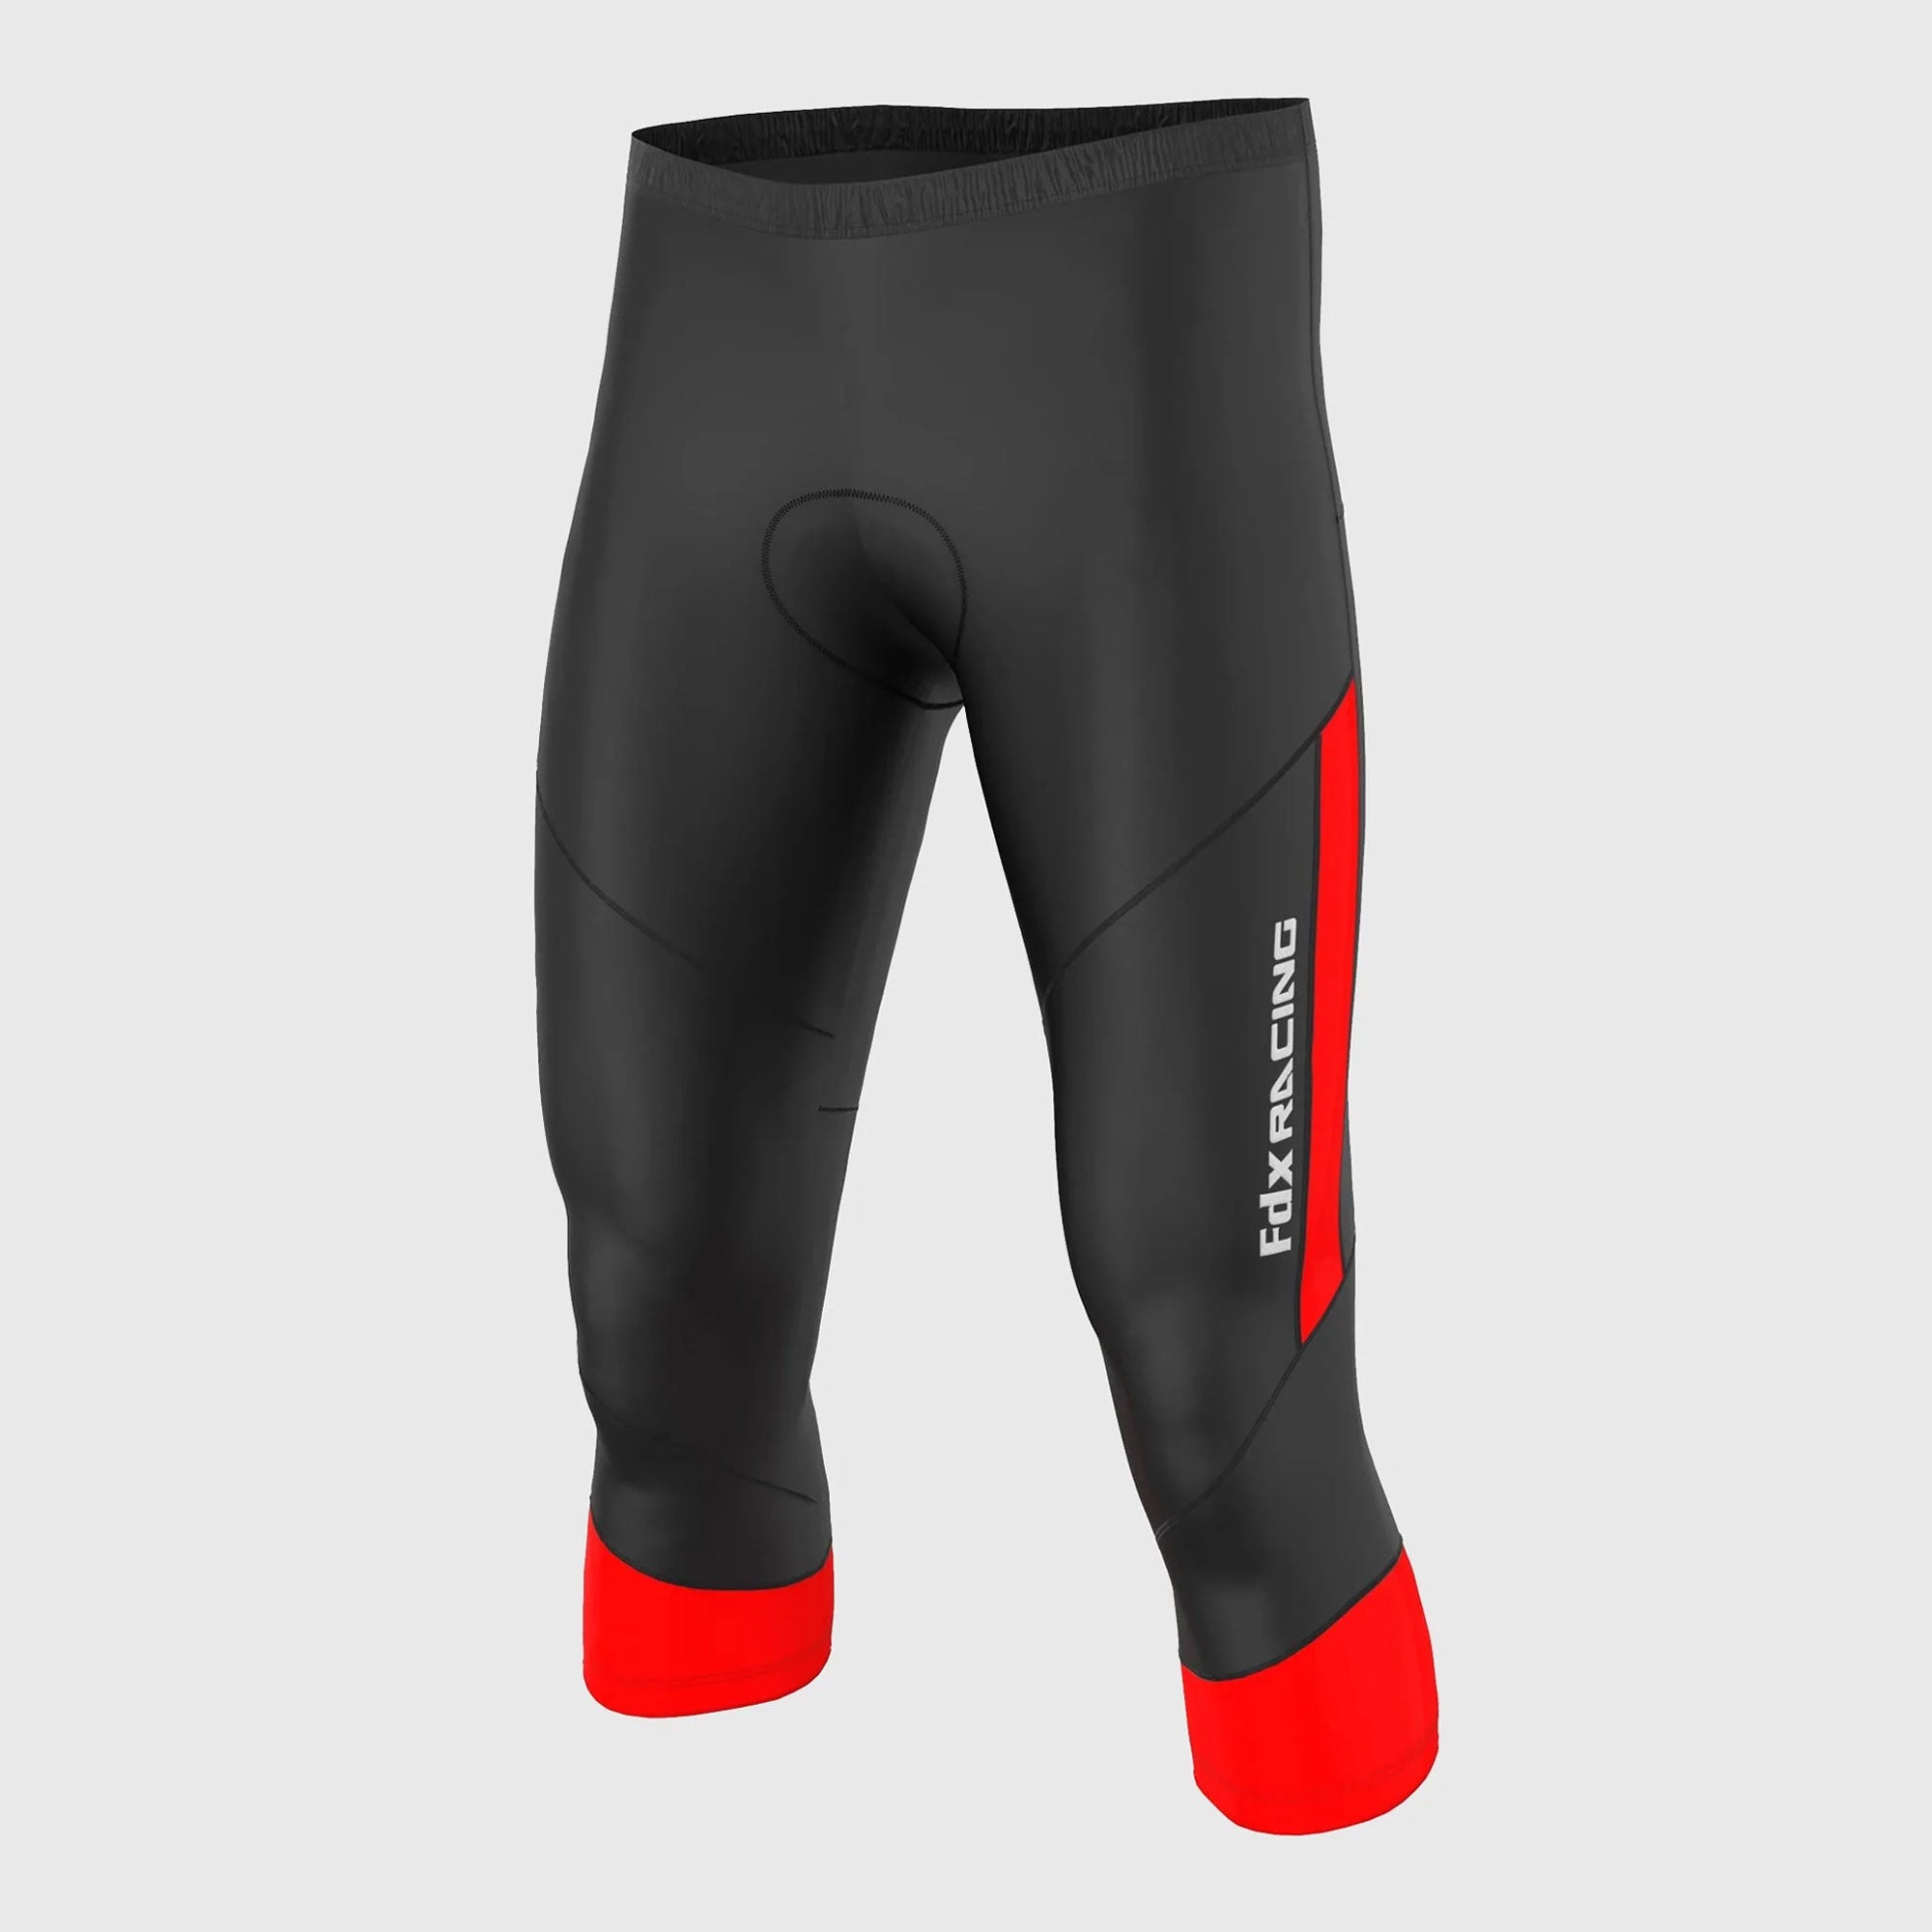 Fdx Mens Black & Red Gel Padded 3/4 Cycling Shorts for Summer Best Outdoor Knickers Road Bike Short Length Pants - Gallop